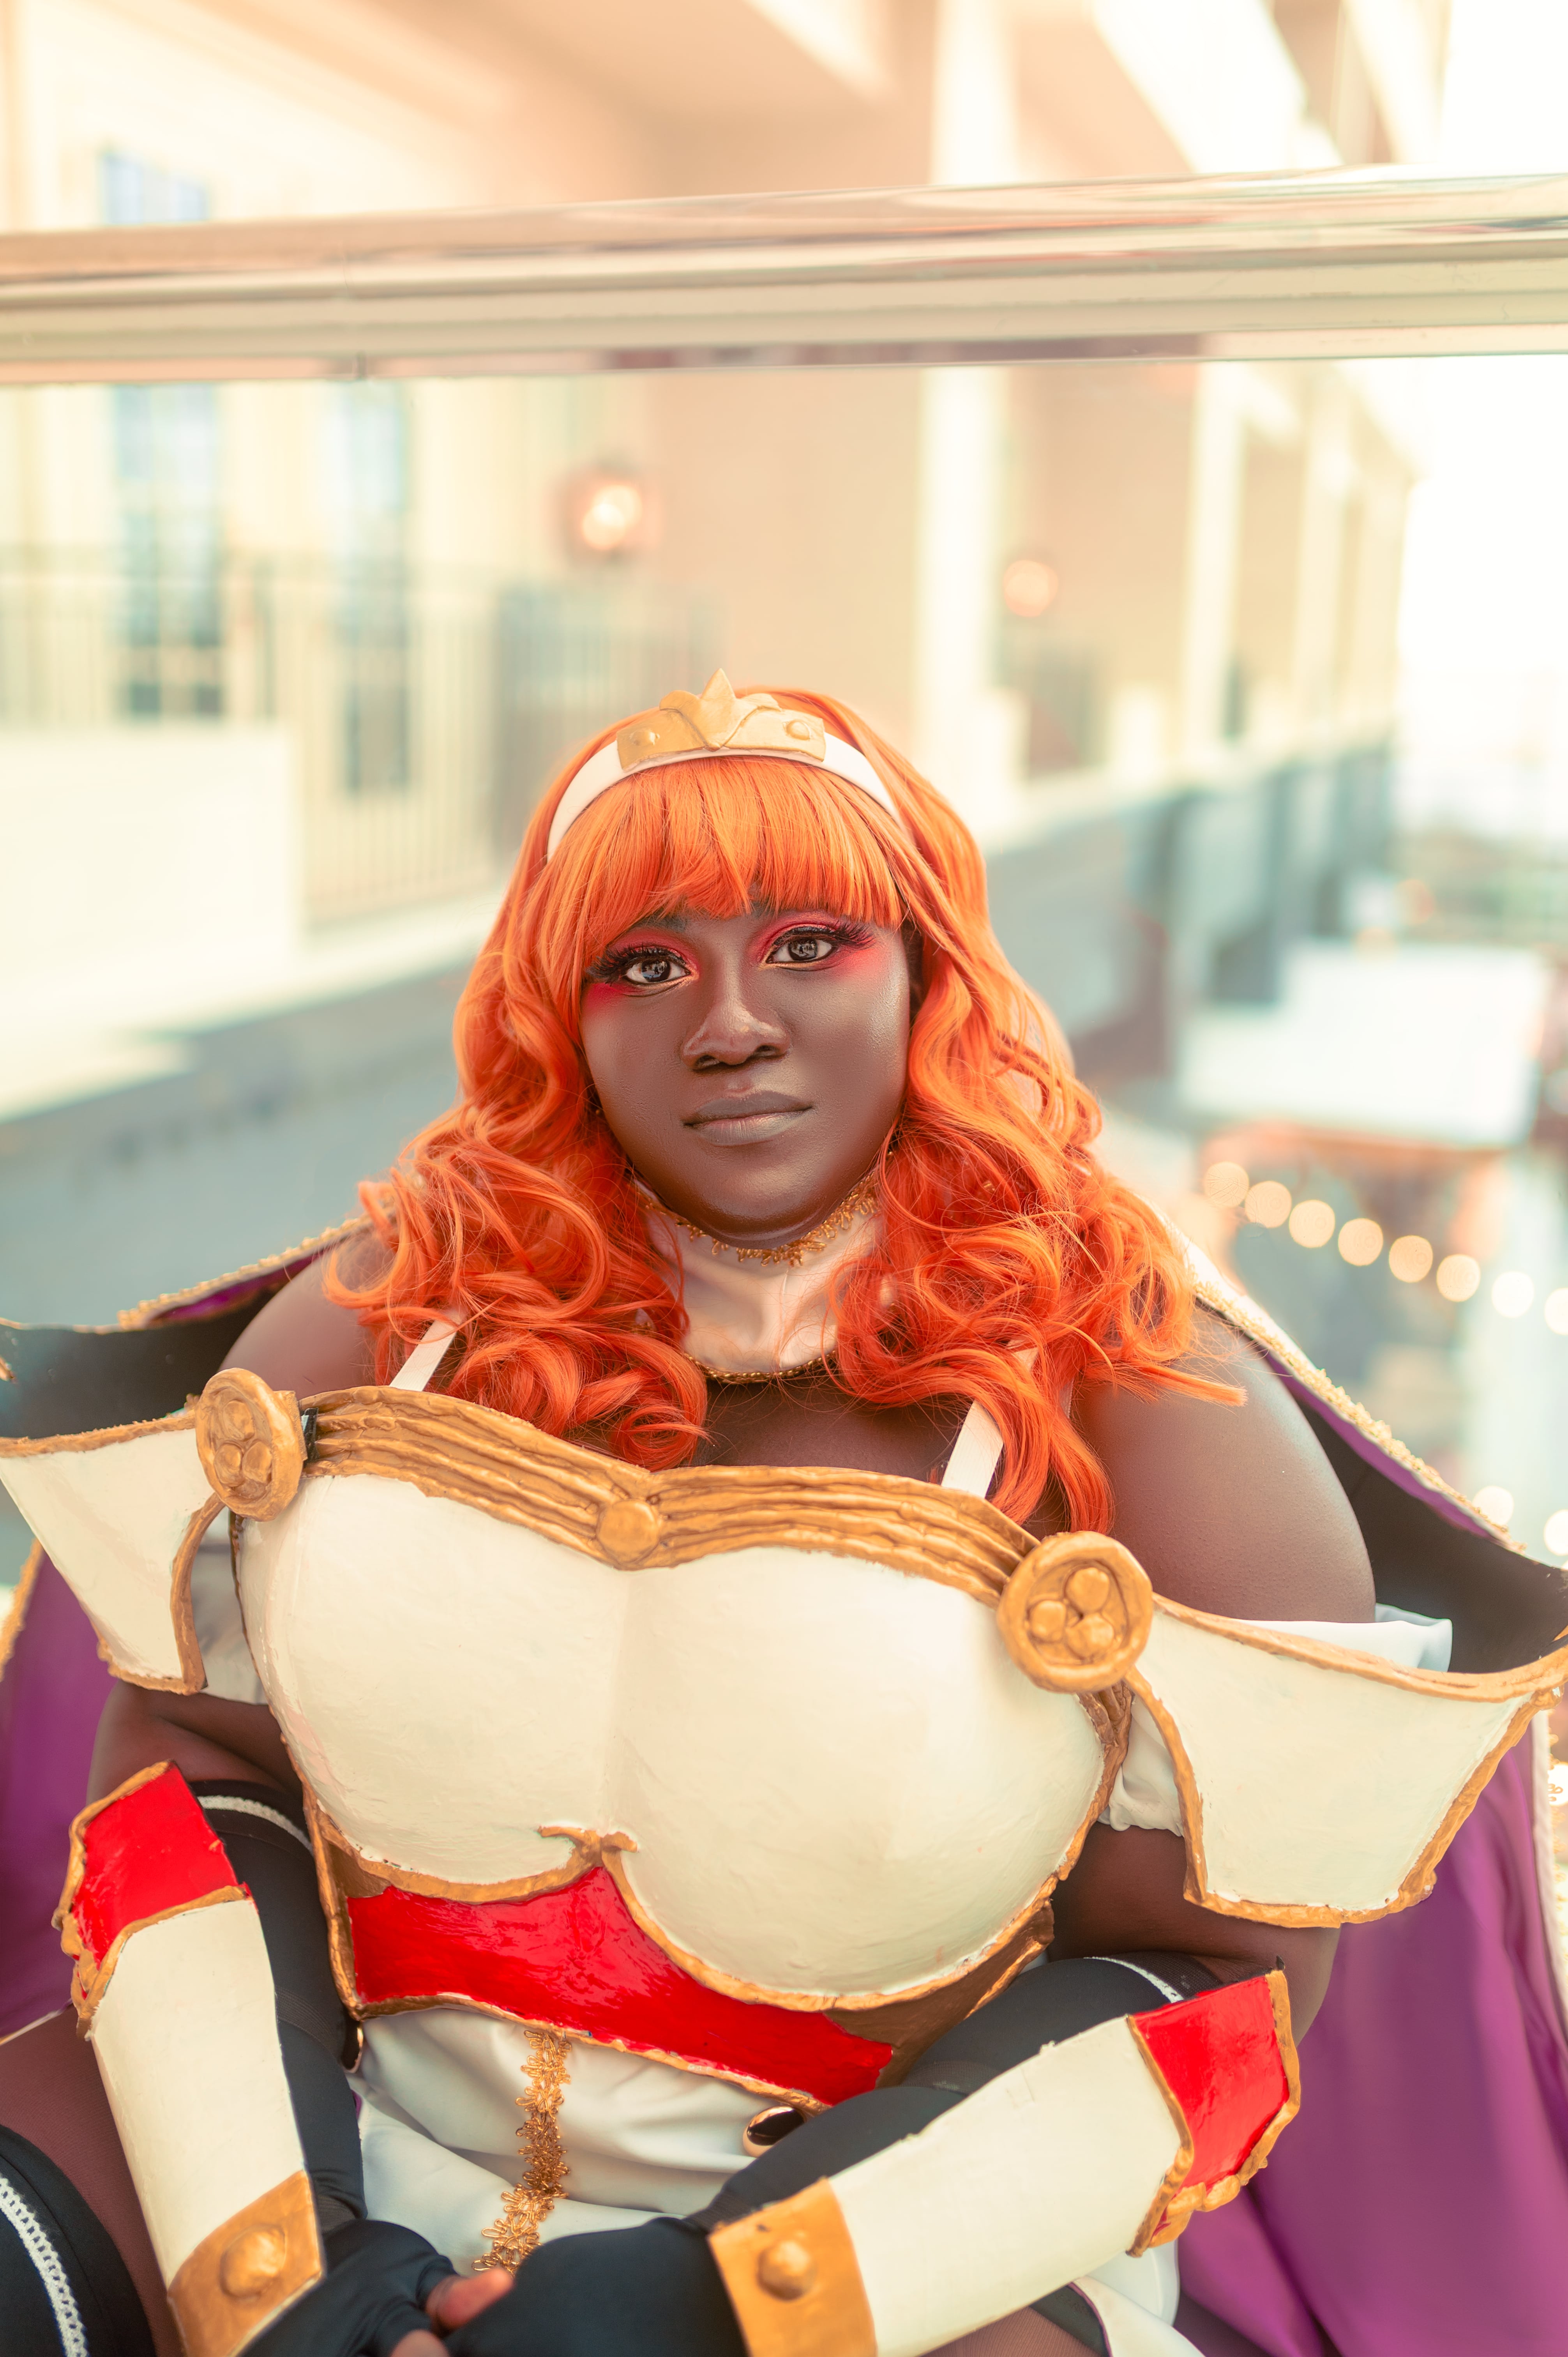 Black and plus sized woman from the waist up facing the camera. She's wearing an orange wig with white and gold headband. She's also wearing a white dress and cape with gold details, white chest, hanging shoulder, and bracer armor with red and gold details. She's sitting down with her hands together on her lap and facing the camera.